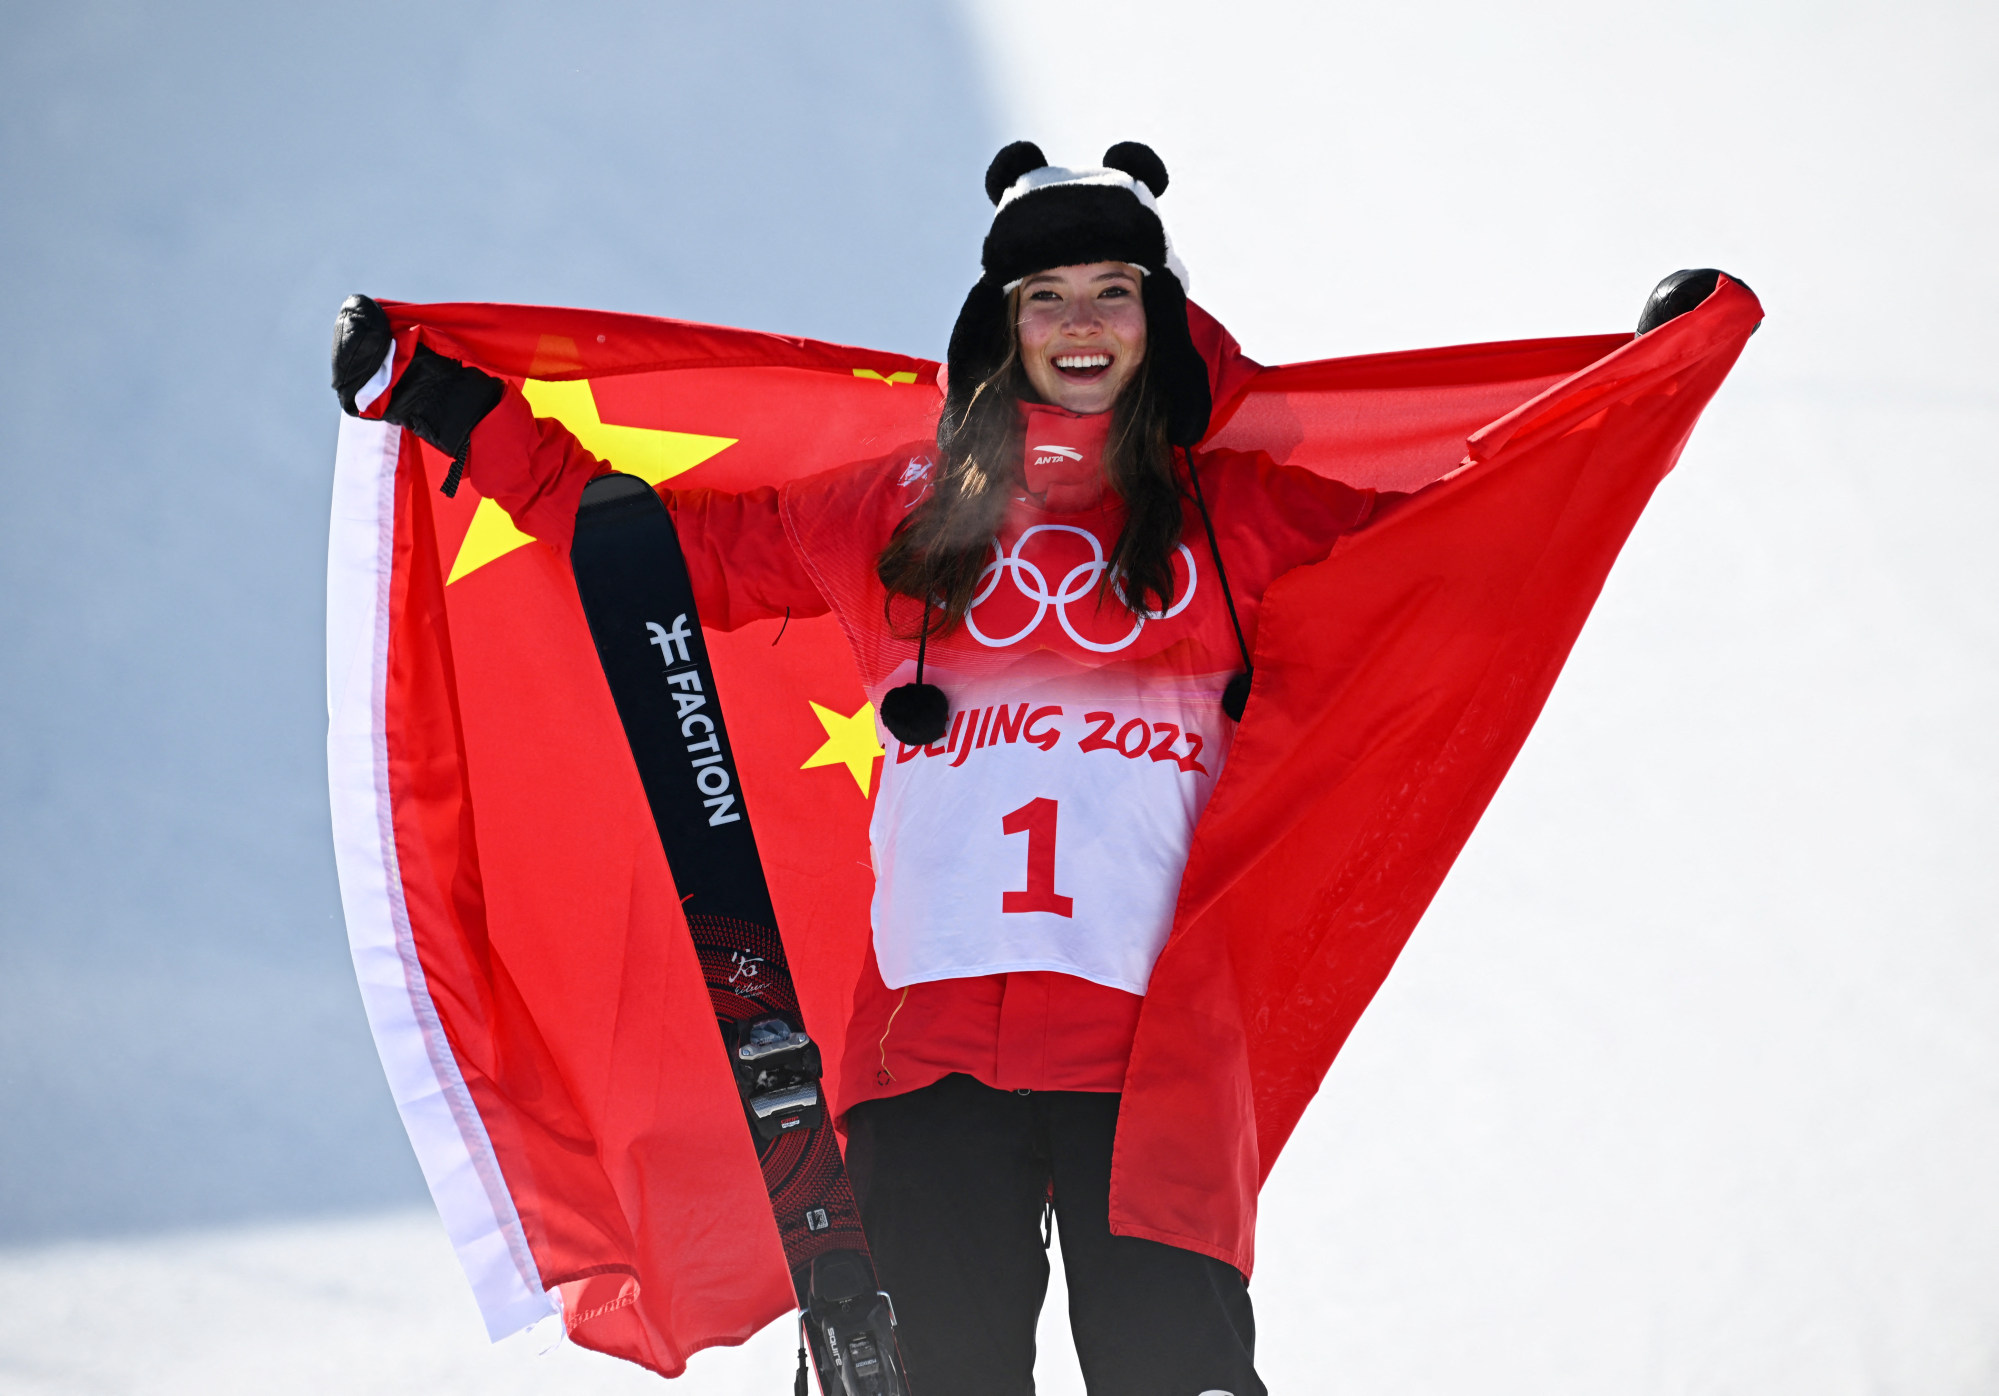 Eileen Gu, 18, poster girl of Winter Olympics, is a Victoria's Secret and  Vogue model who snubbed Team USA for China